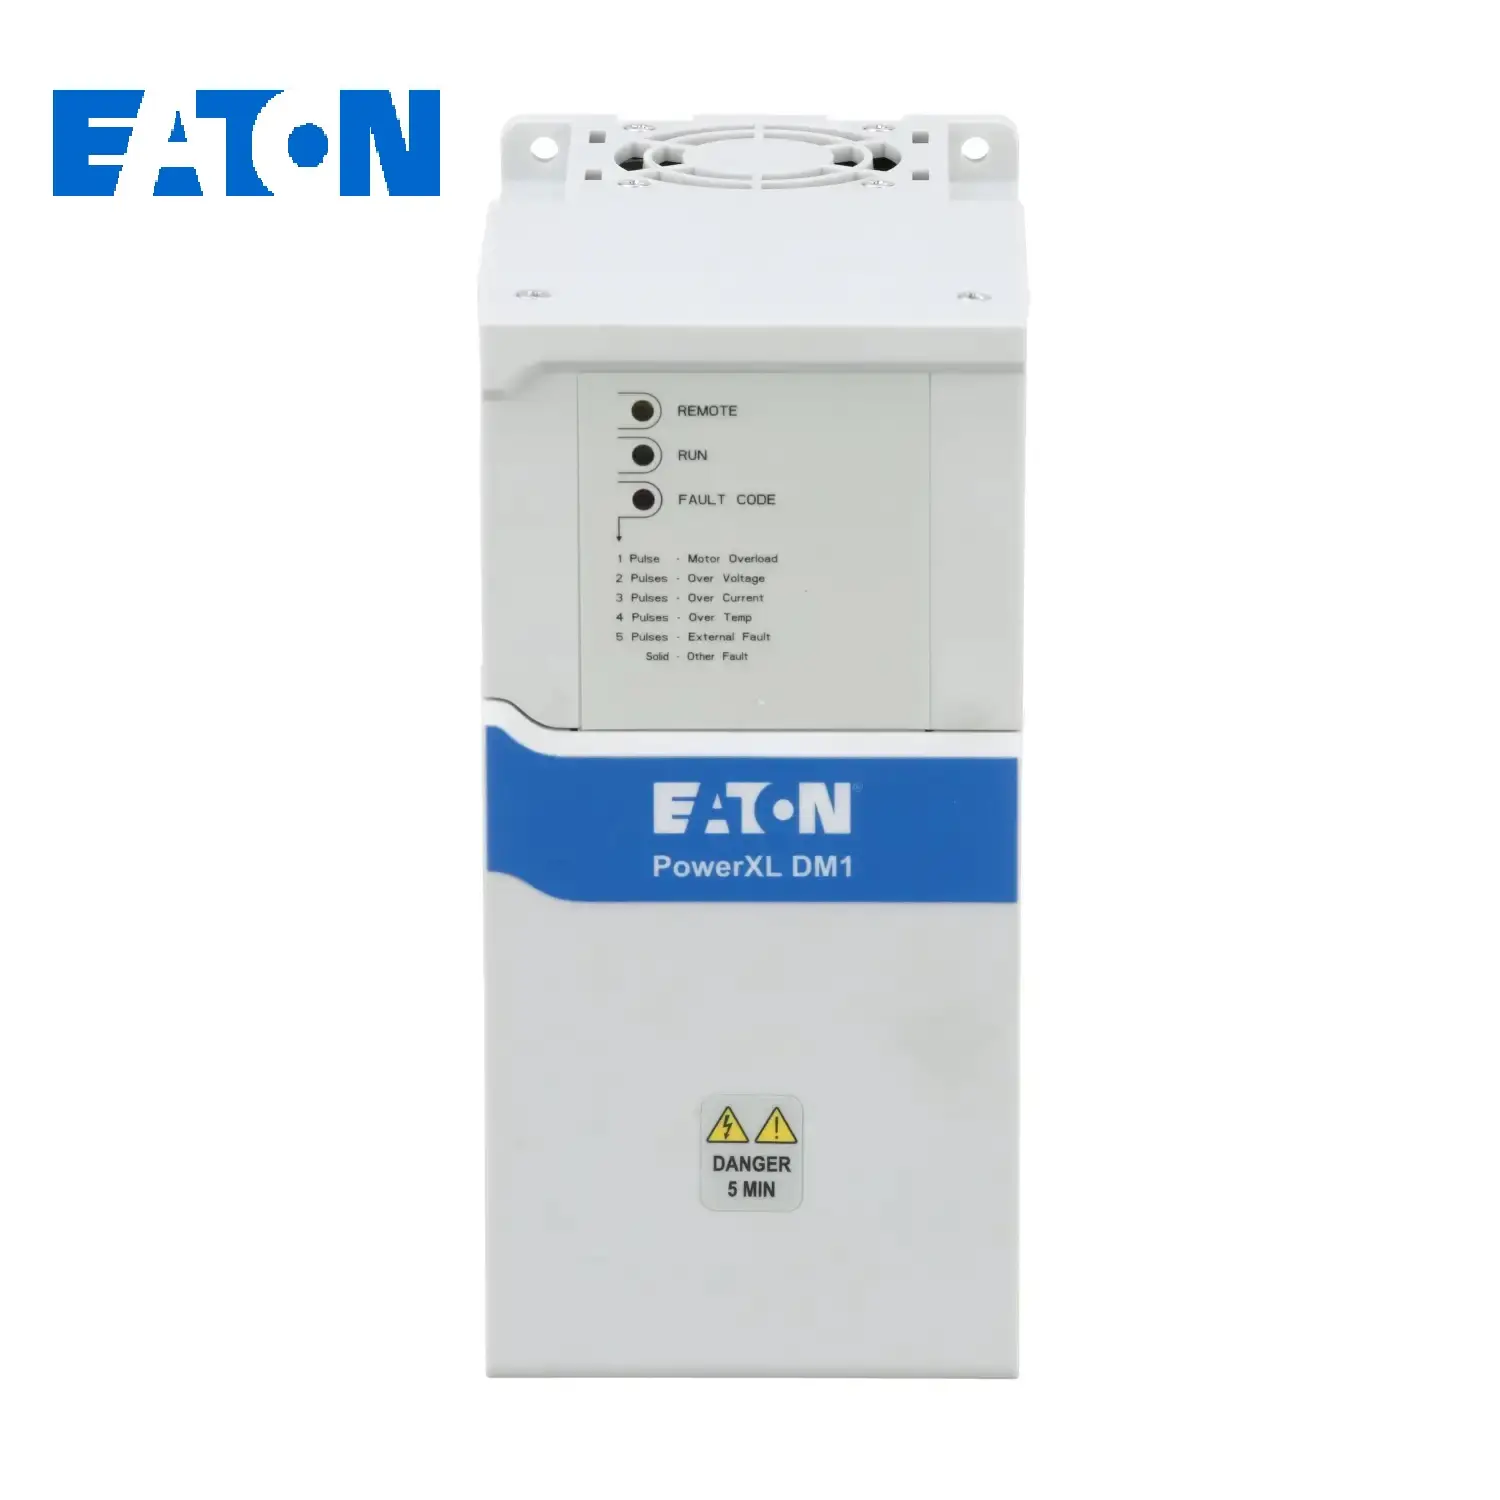 VFD inverter Eaton Power XL DM1 Variable frequency drive, 400 V AC, 3-phase, 0.75kw to 22KW Direct from Authorized seller